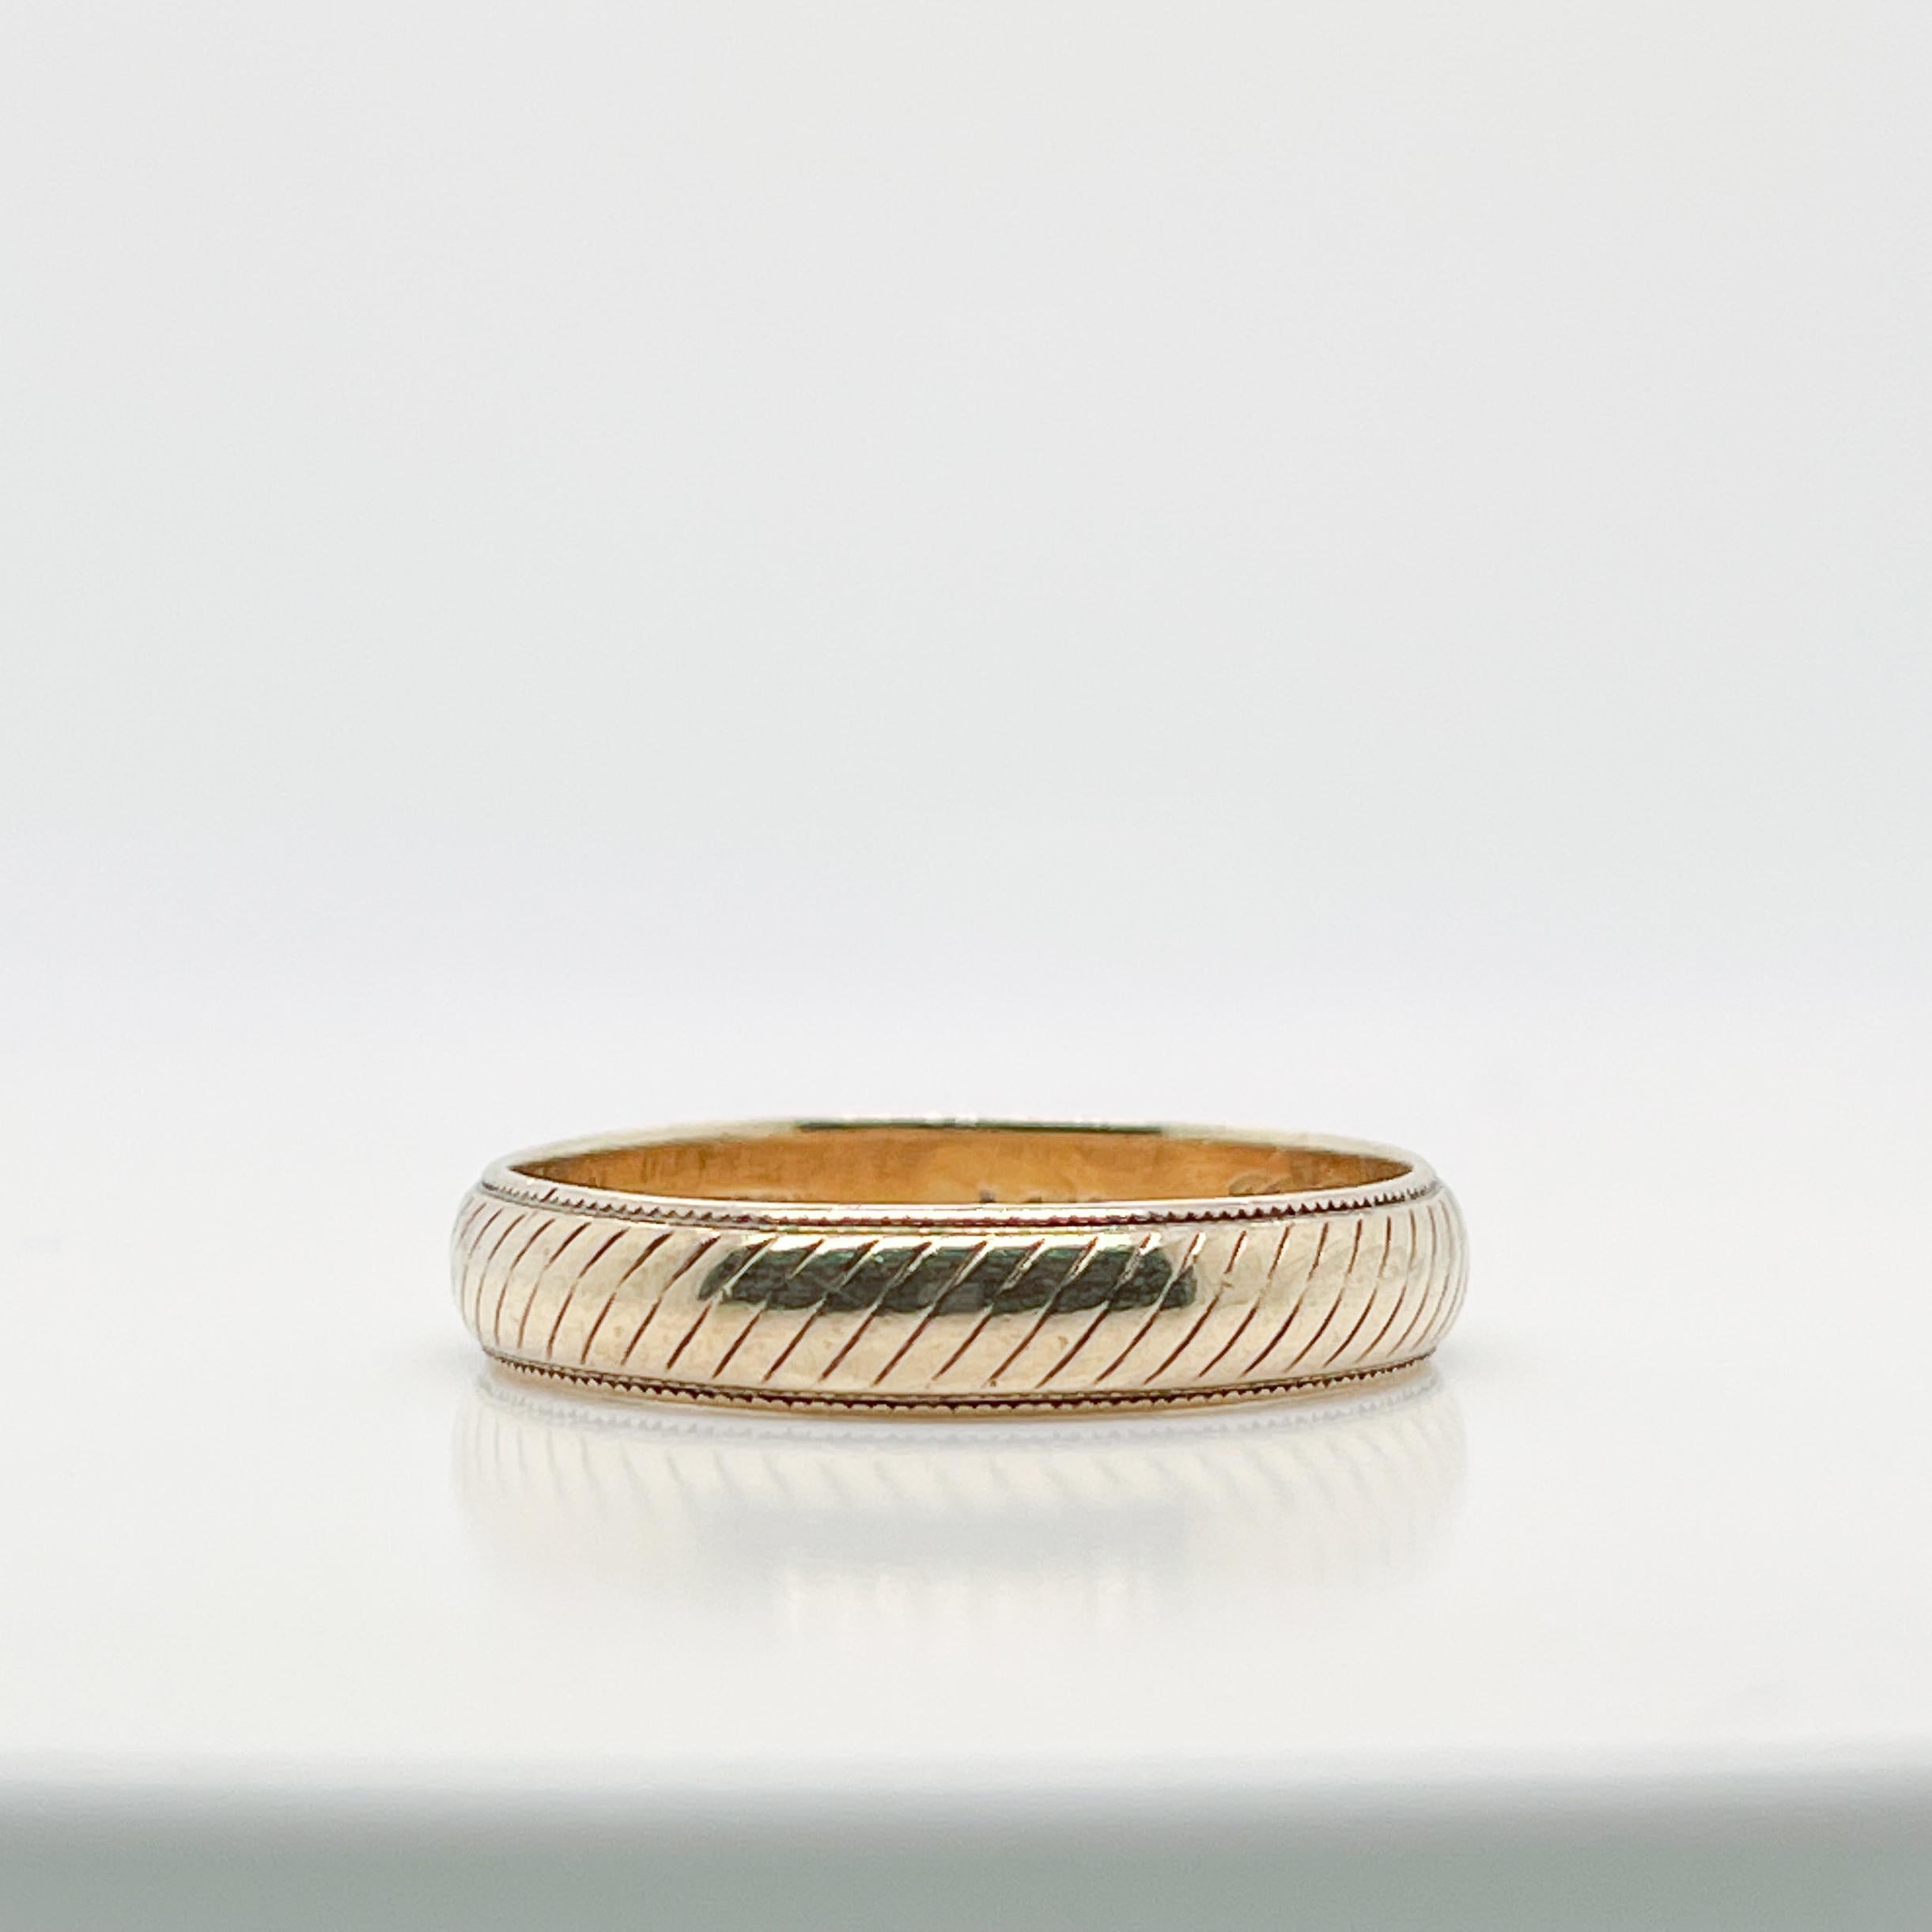 A very fine wedding band or ring.

By Tiffany & Co.

In 14k yellow gold. 

With engraved diagonal lines around the circumference of the large half round band.

Simply a wonderful ring by Tiffany & Co.!

Date:
20th Century

Overall Condition:
It is